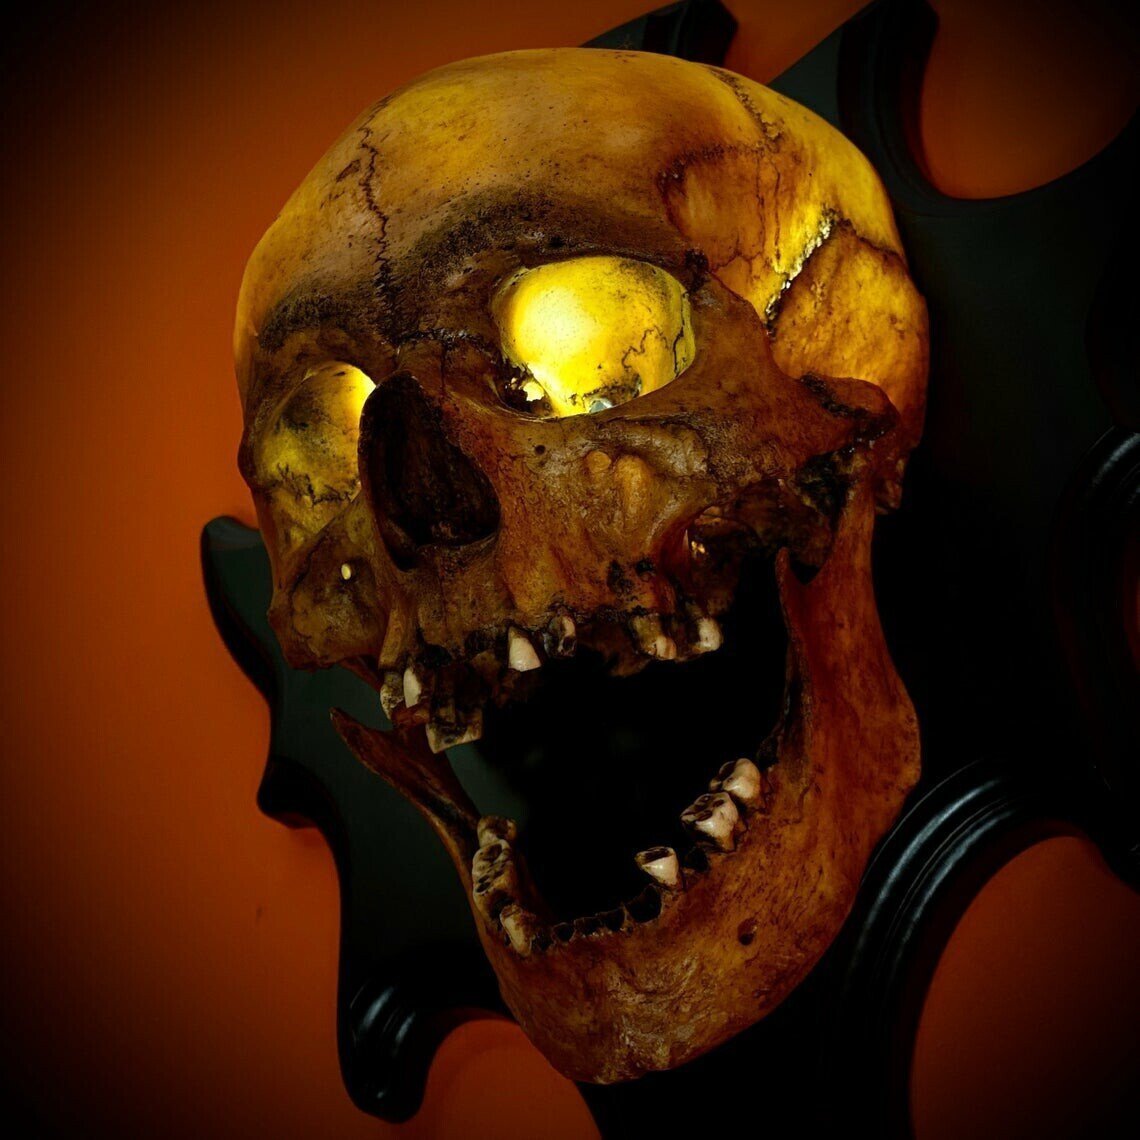 Get Ready for Halloween with our Skull Lamp - Pre Sale 49% OFF!